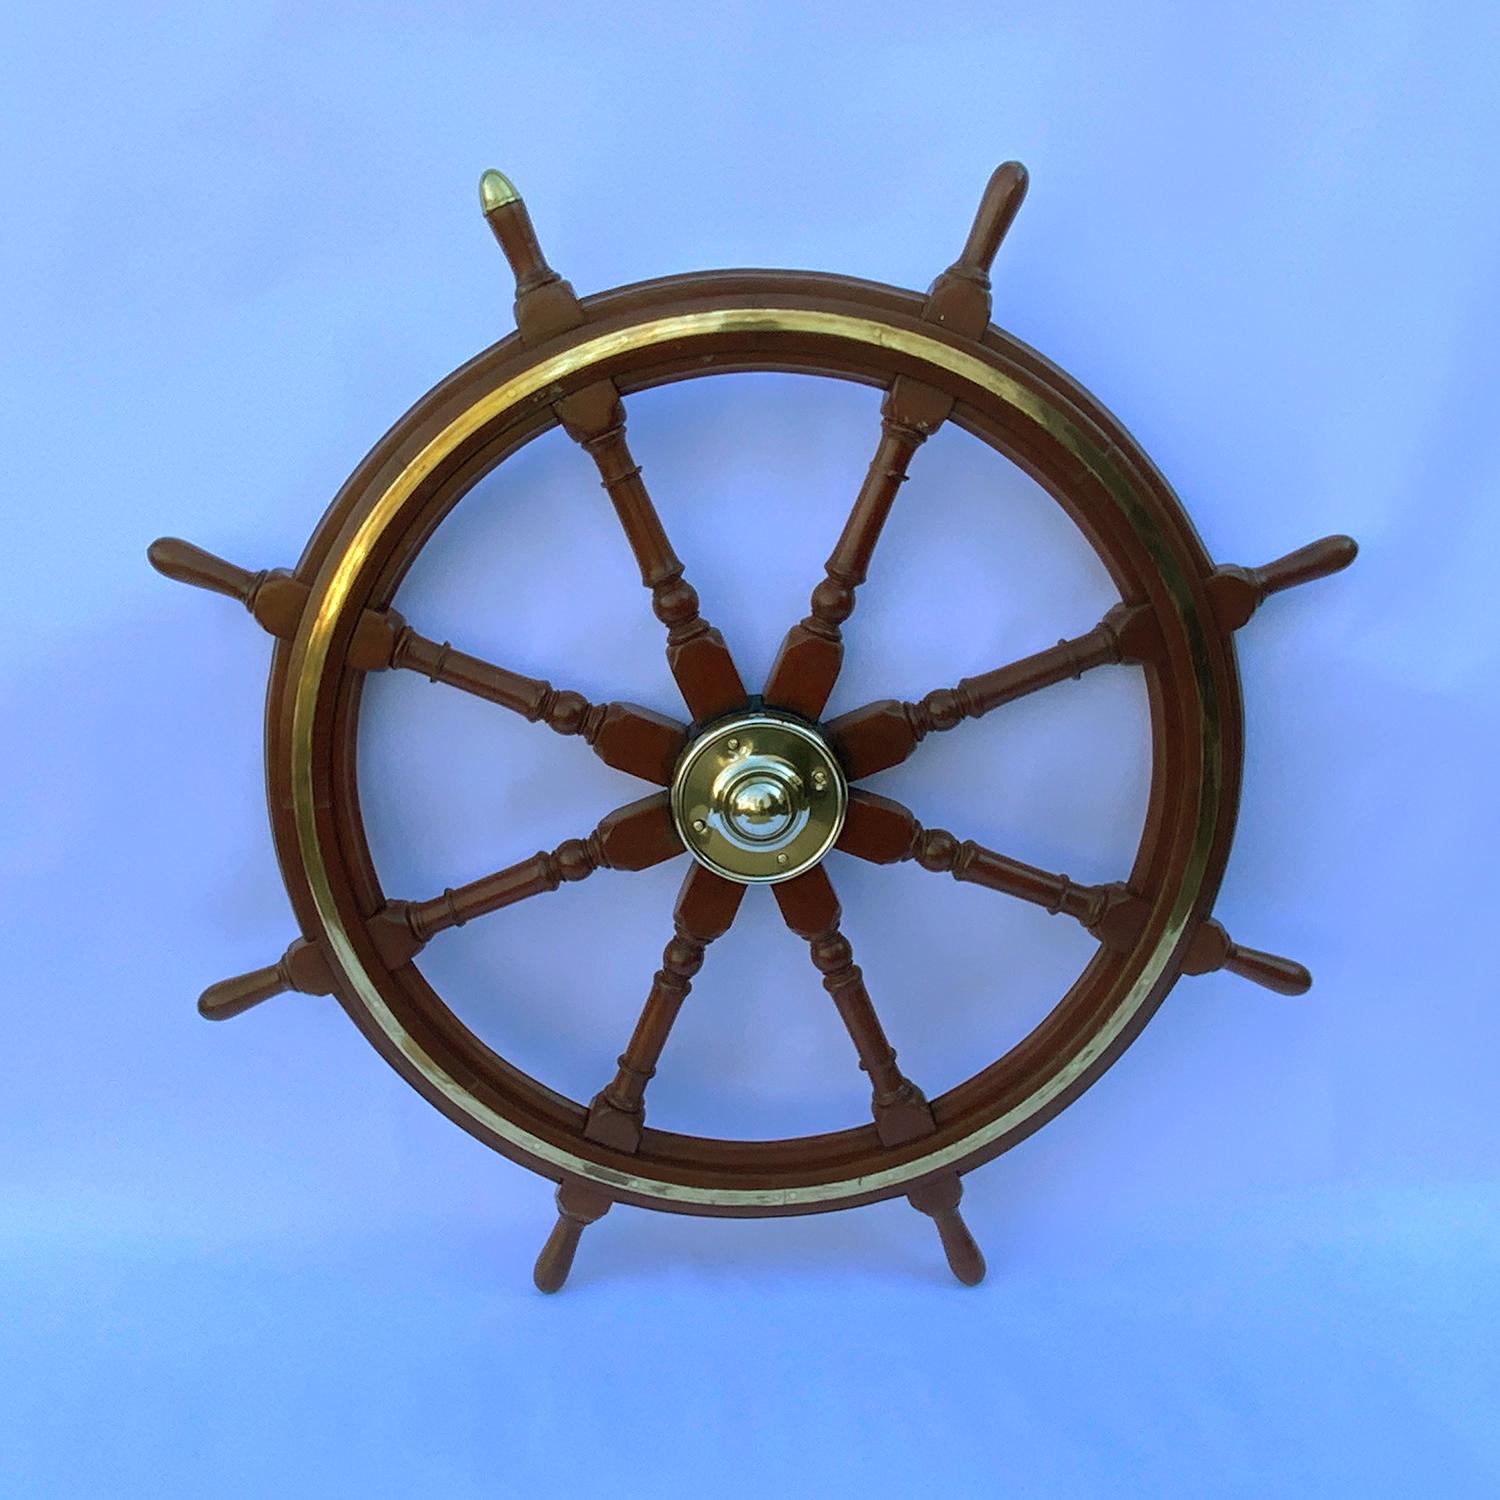 Antique eight spoke ship's wheel with brass hub and trim ring. Varnished wood finish and highly polished brasses. This is burly, strong ship's wheel from the late nineteenth century. Circa 1890. Made in England.